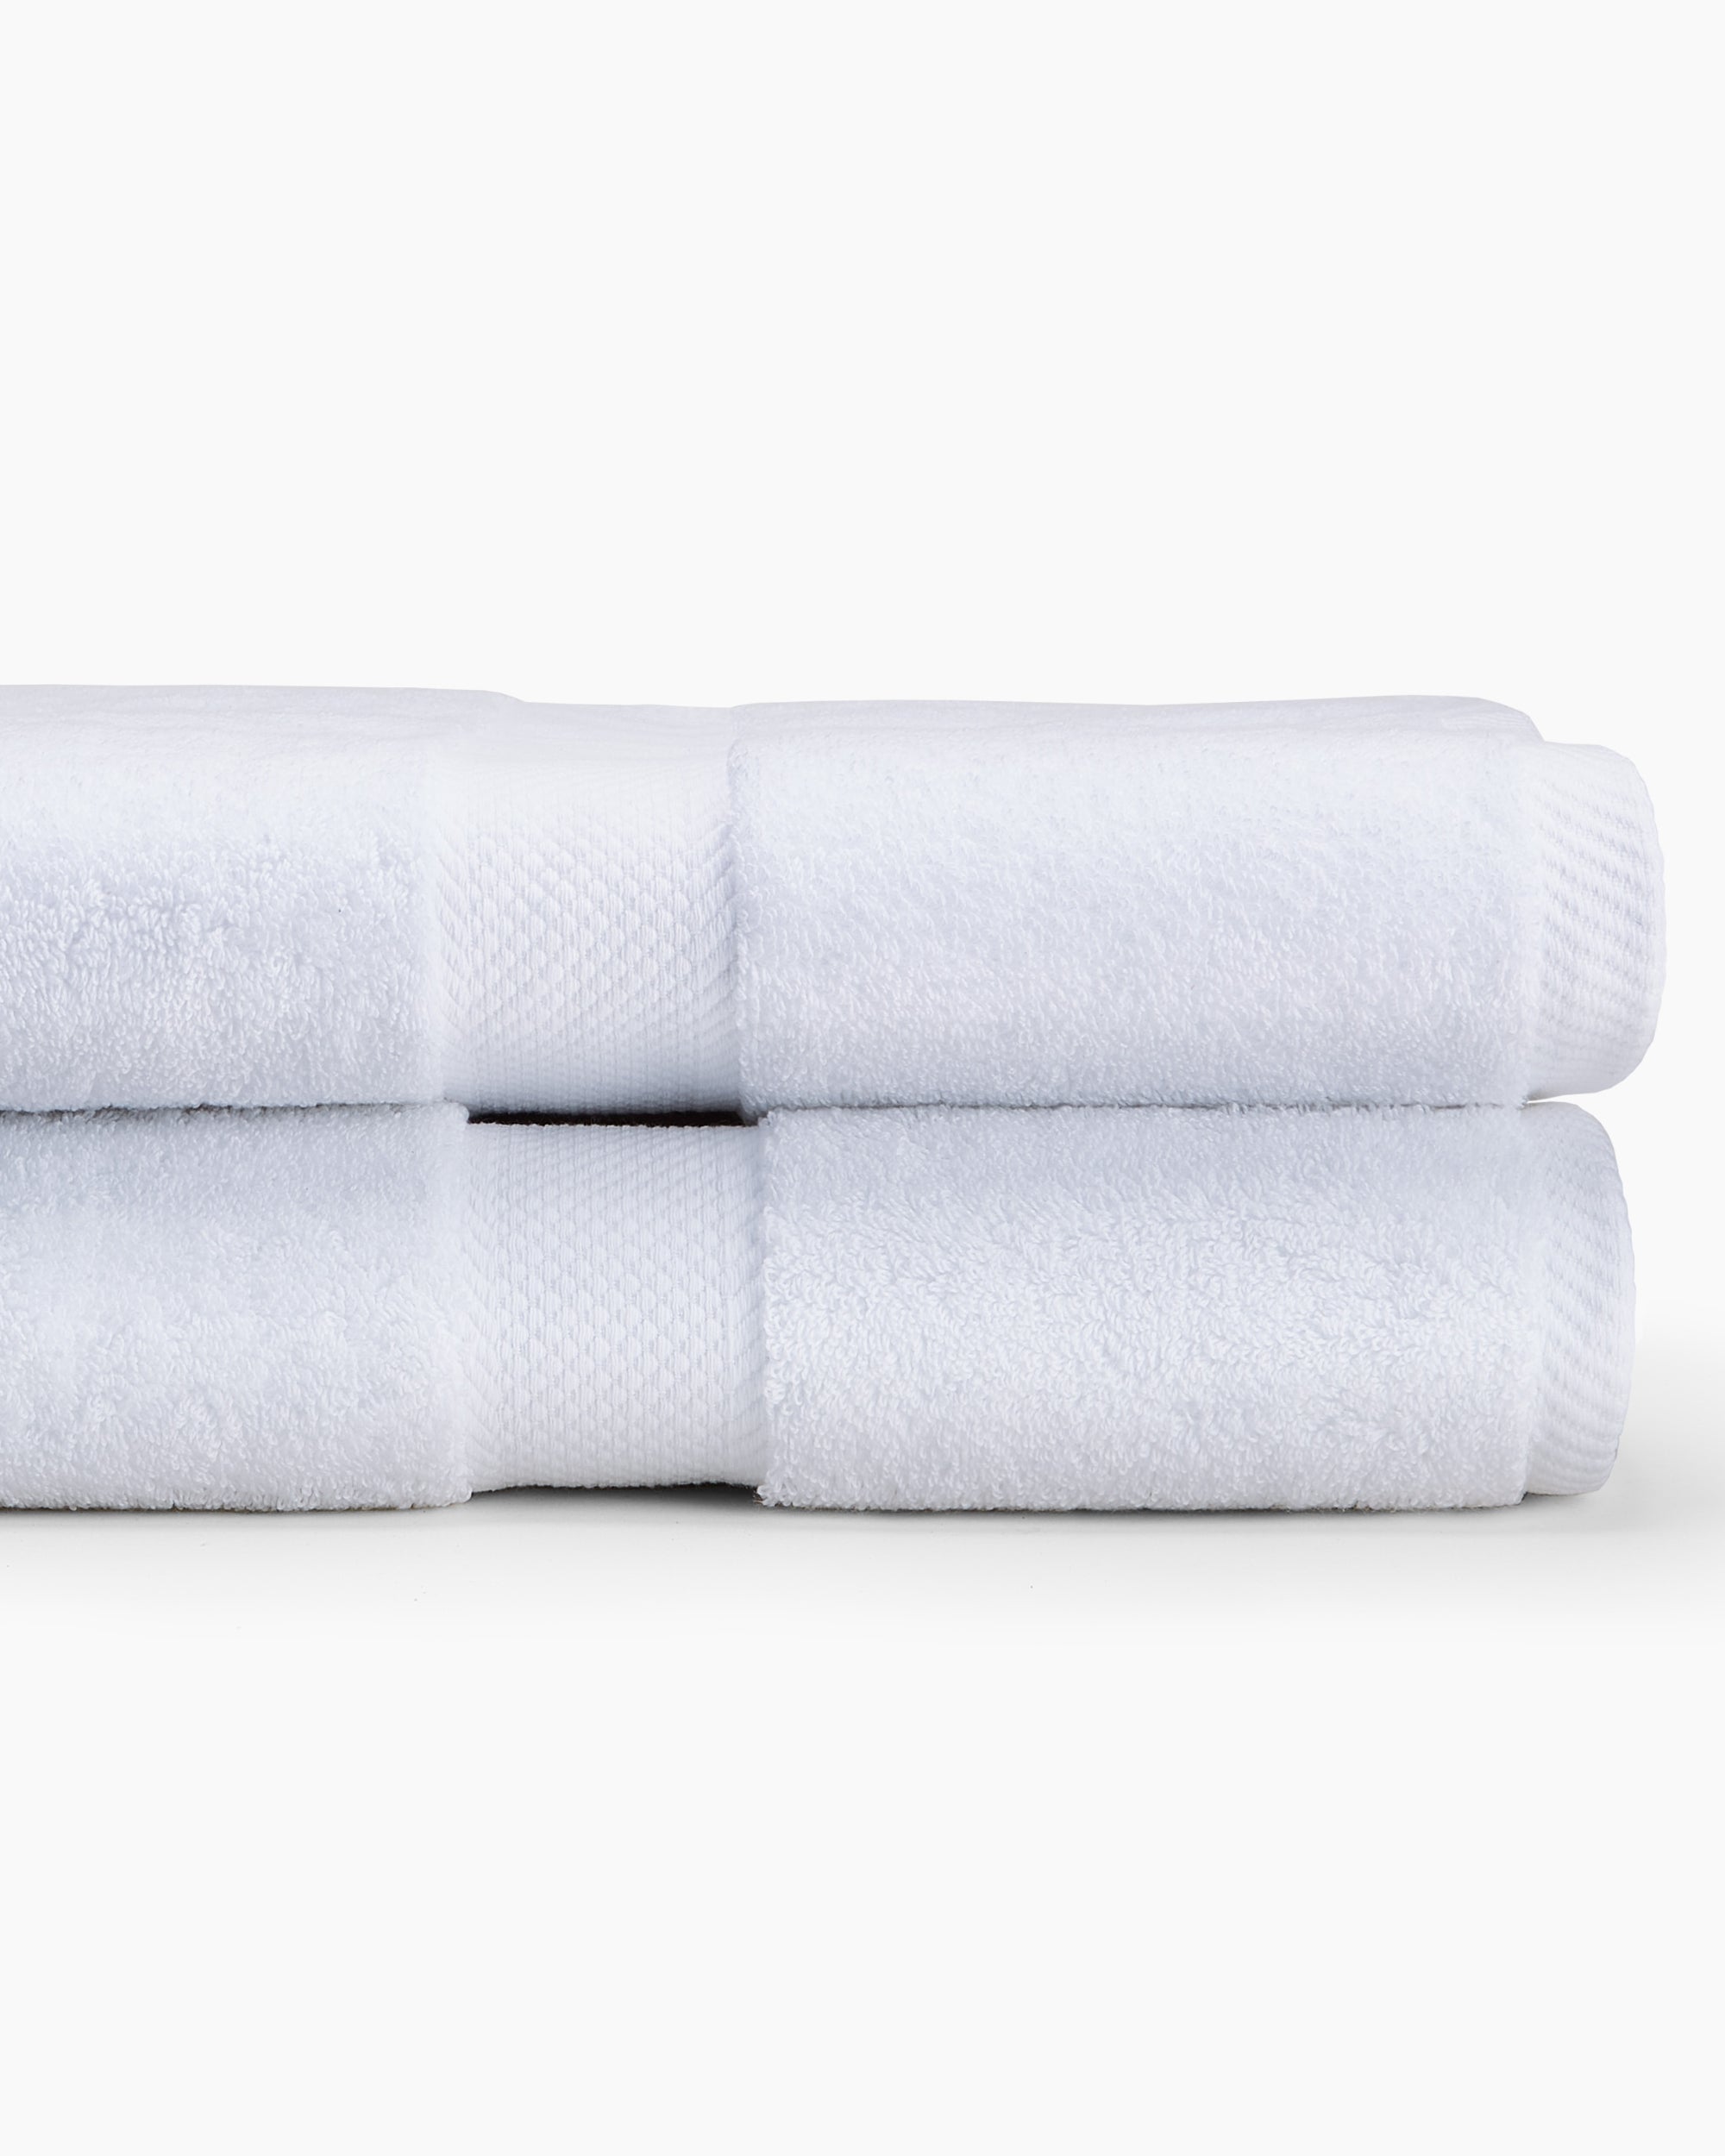 Ultra Soft Cotton Bath Towels Large Thick Absorbent Hand Bathroom